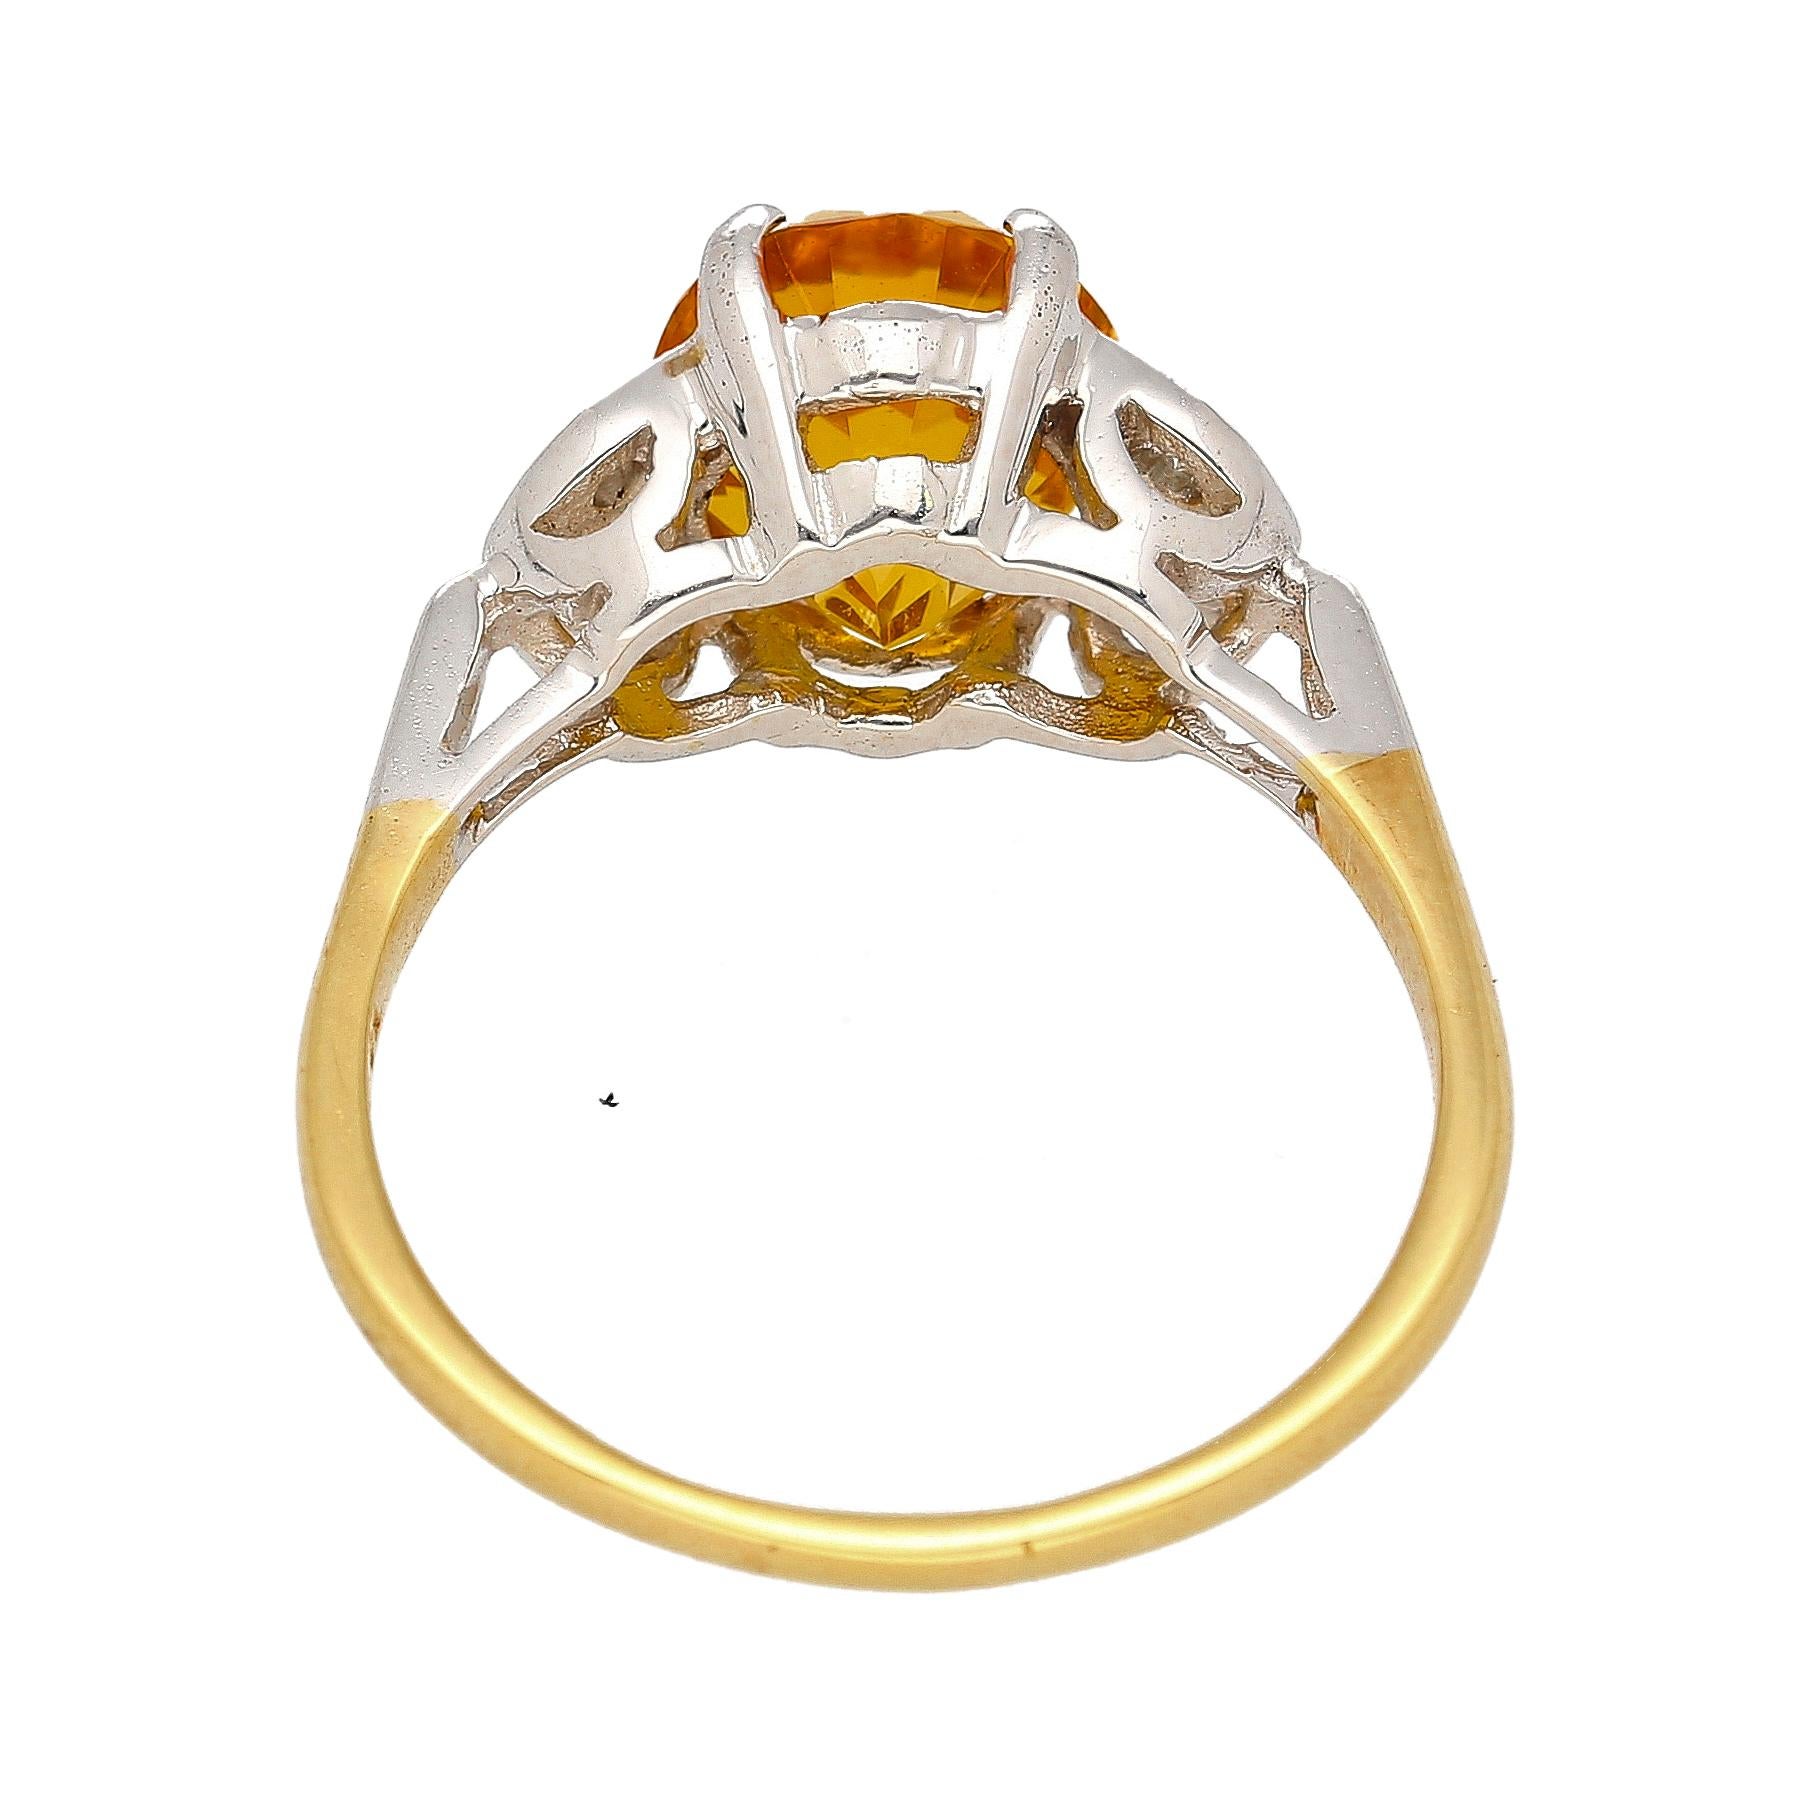 3.06 carat natural yellow sapphire and diamond ring. Set in a stunning 2-tone mounting of platinum and 14k yellow gold. The center stone explodes with brilliance and a vivid, rich yellow color saturation. Oval brilliant cut for maximum length and